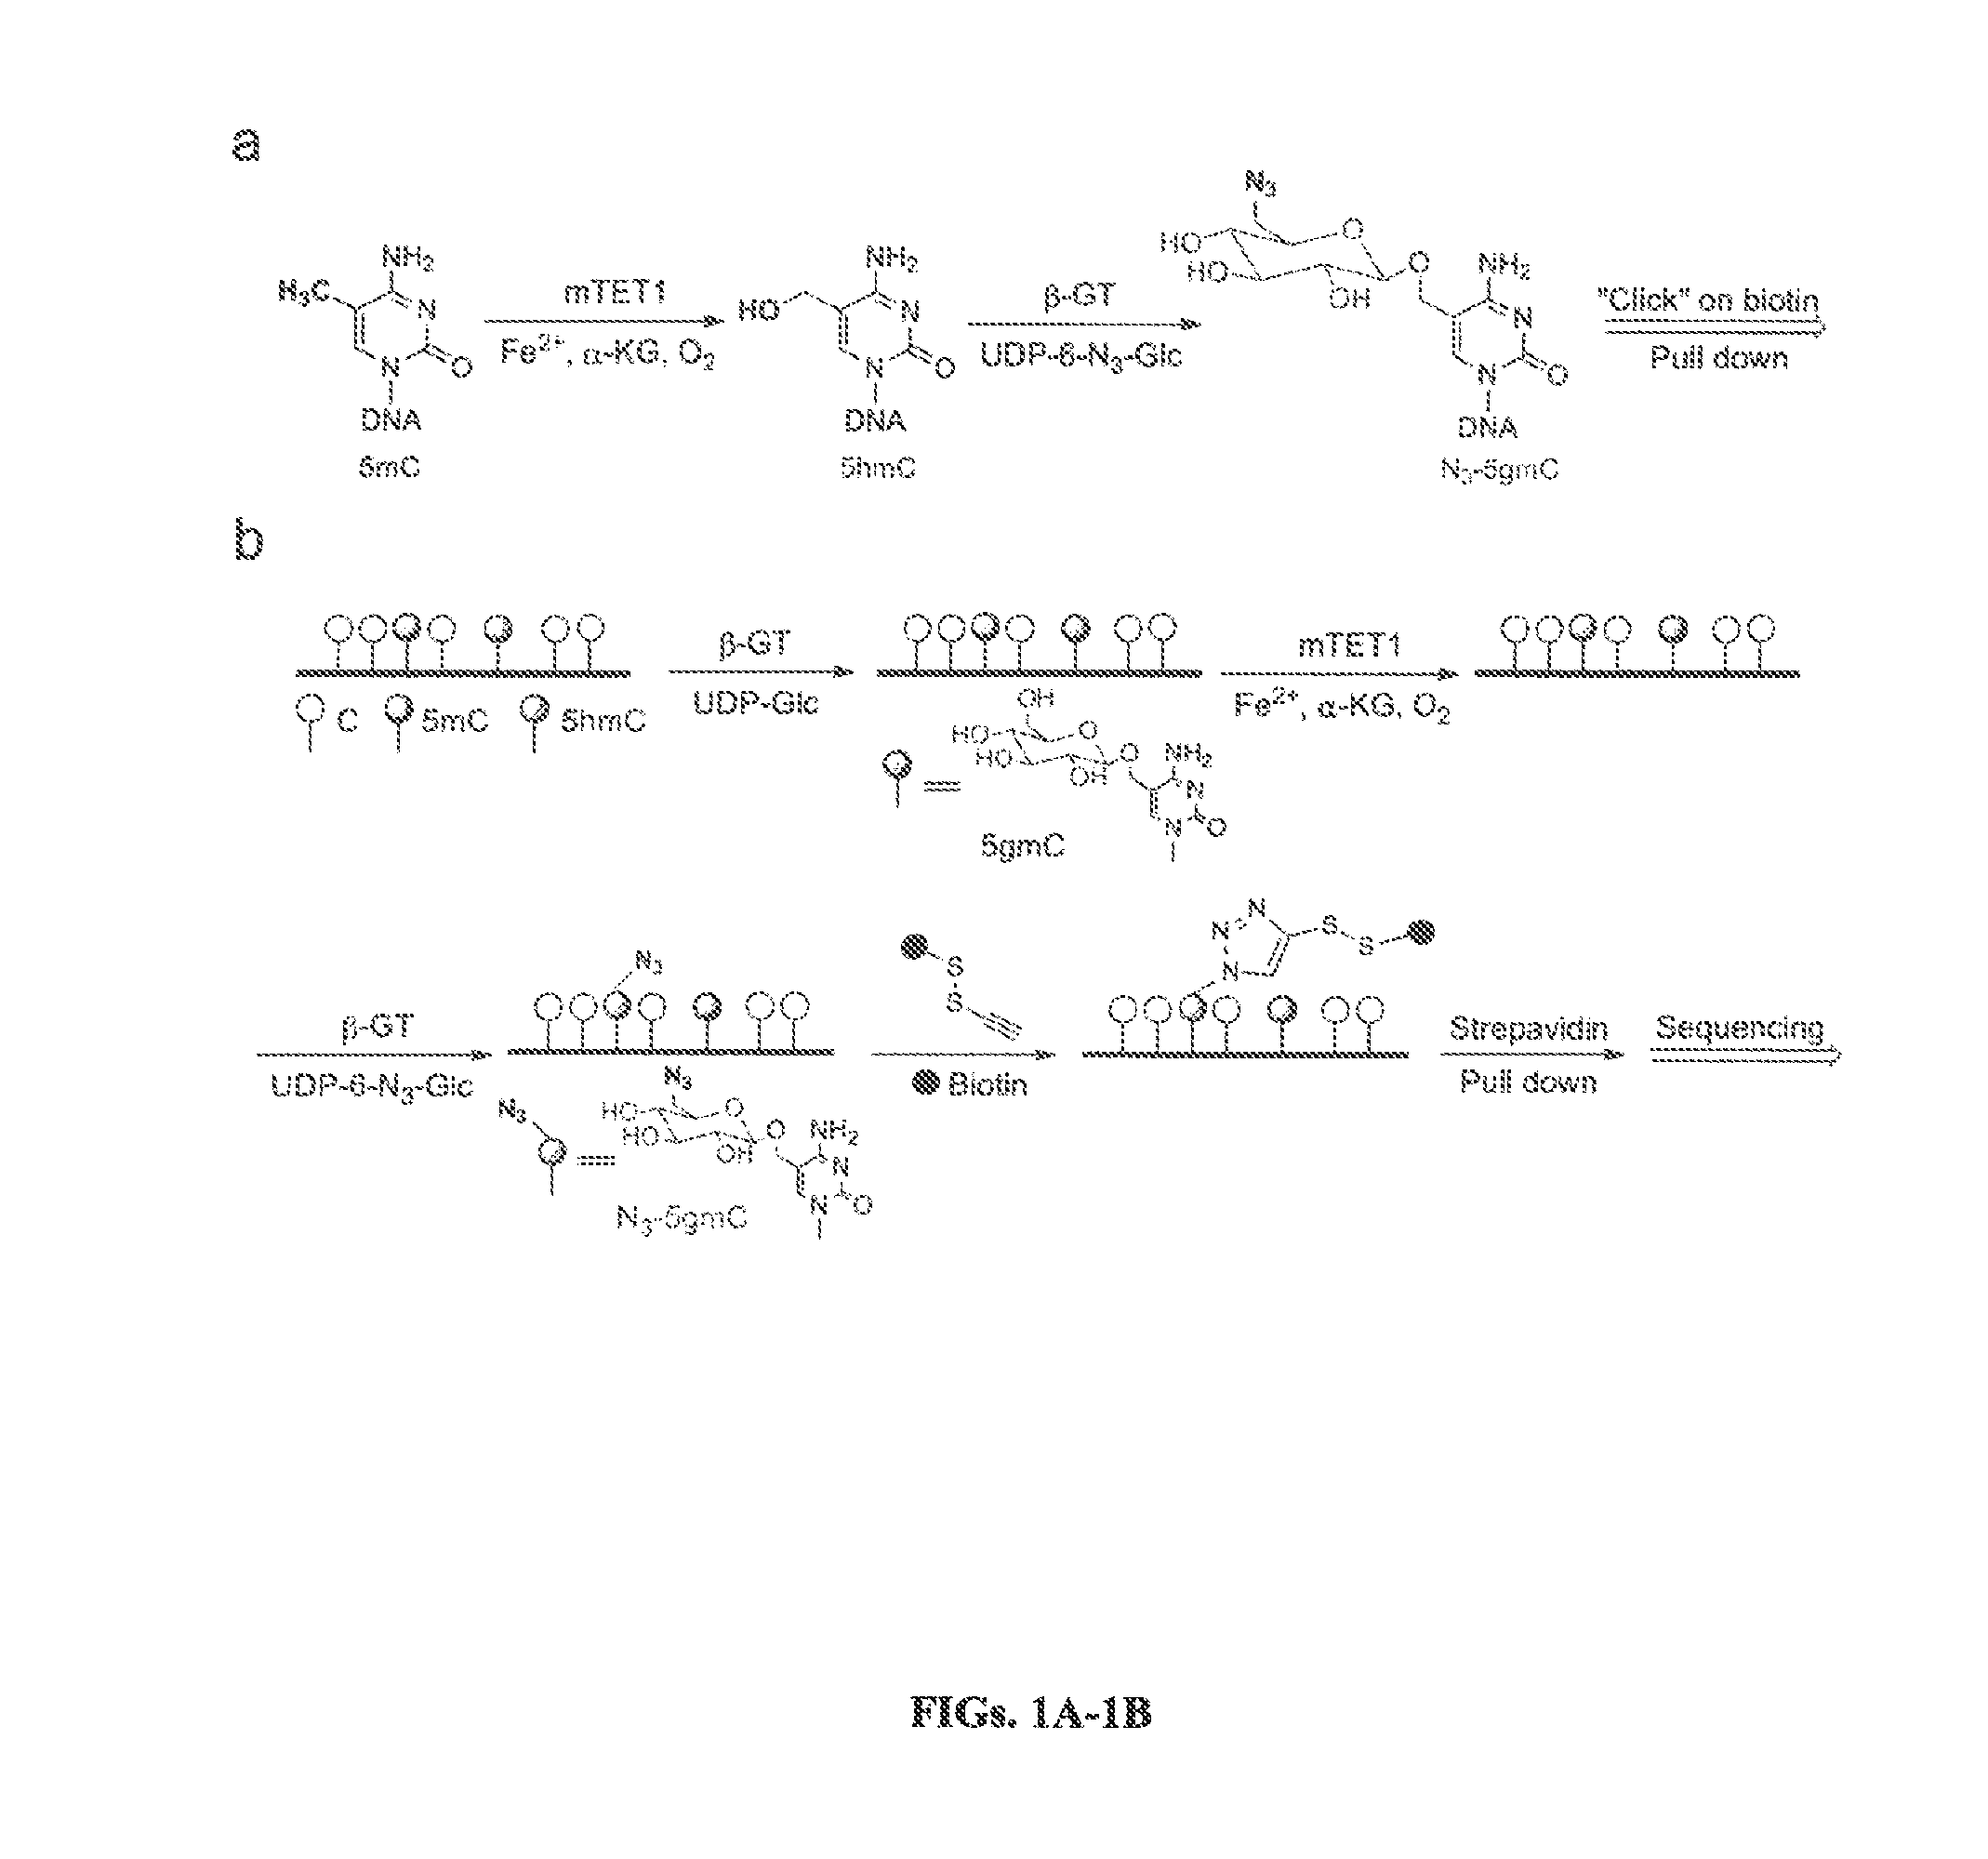 COMPOSITION AND METHODS RELATED TO MODIFICATION OF 5-METHYLCYTOSINE (5-mC)